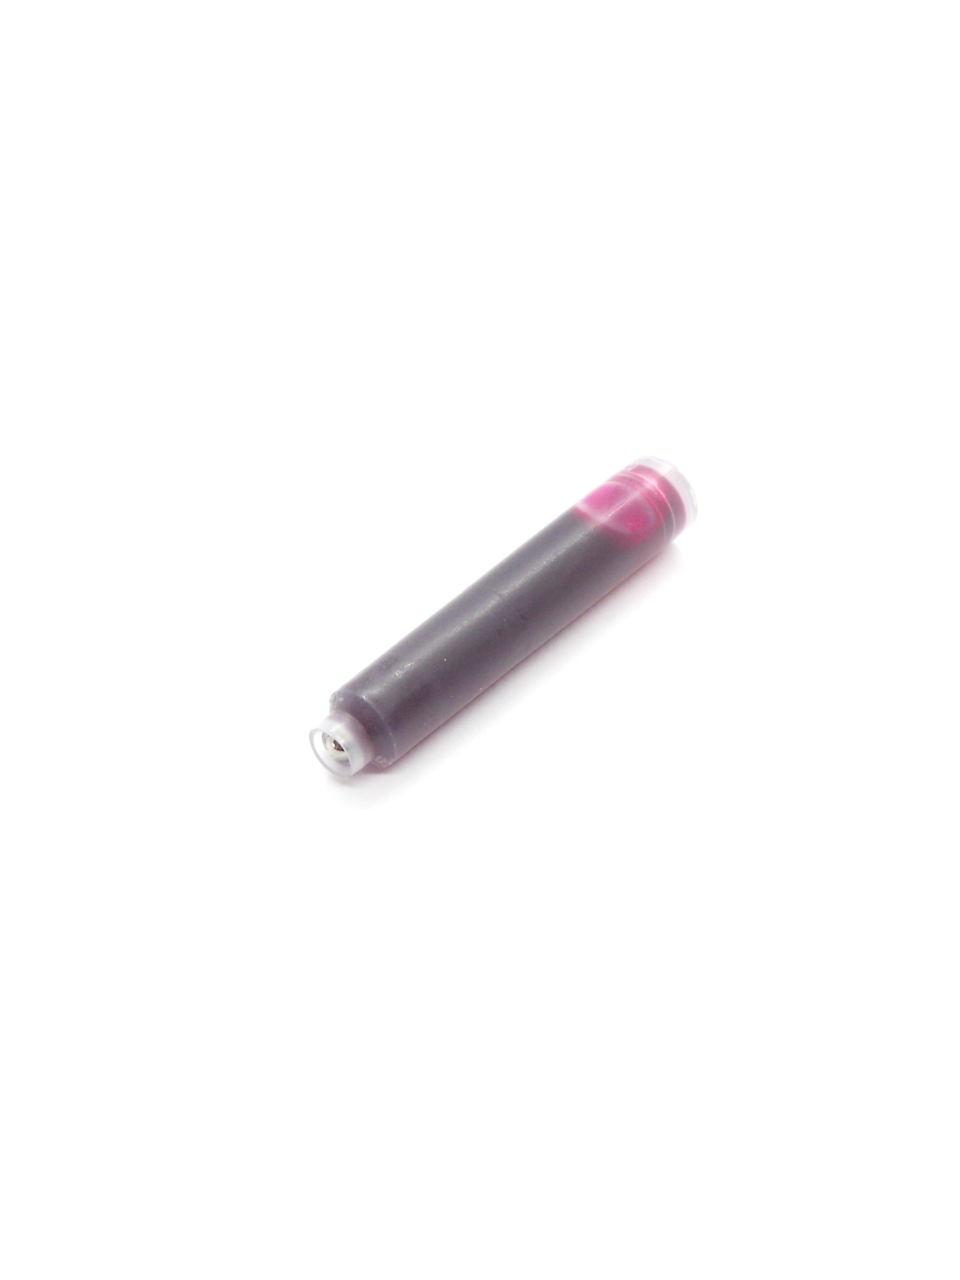 Cartridges For Traveler’s Company Fountain Pens (Pink)